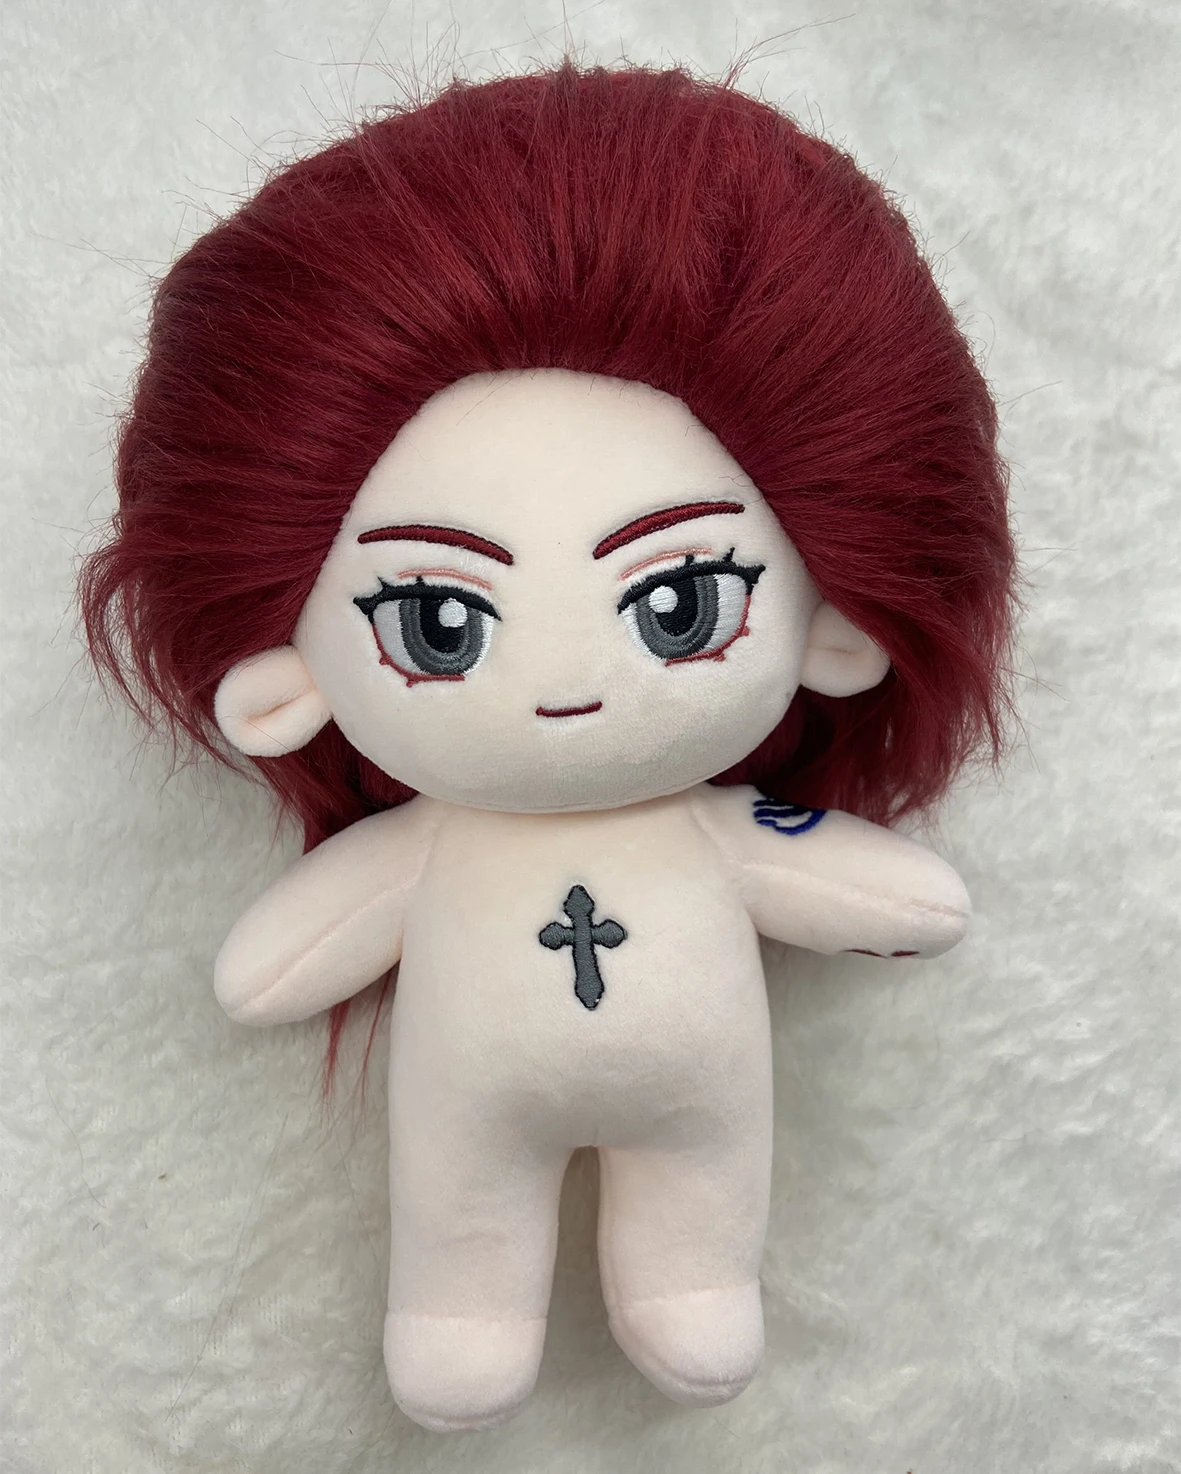 Erza Scarlet Anime FAIRY TAIL 20cm Cosplay Cartoon Plush Body Cute Cotton Naked Dolls Dress UP Toys Fans Gift Mascot